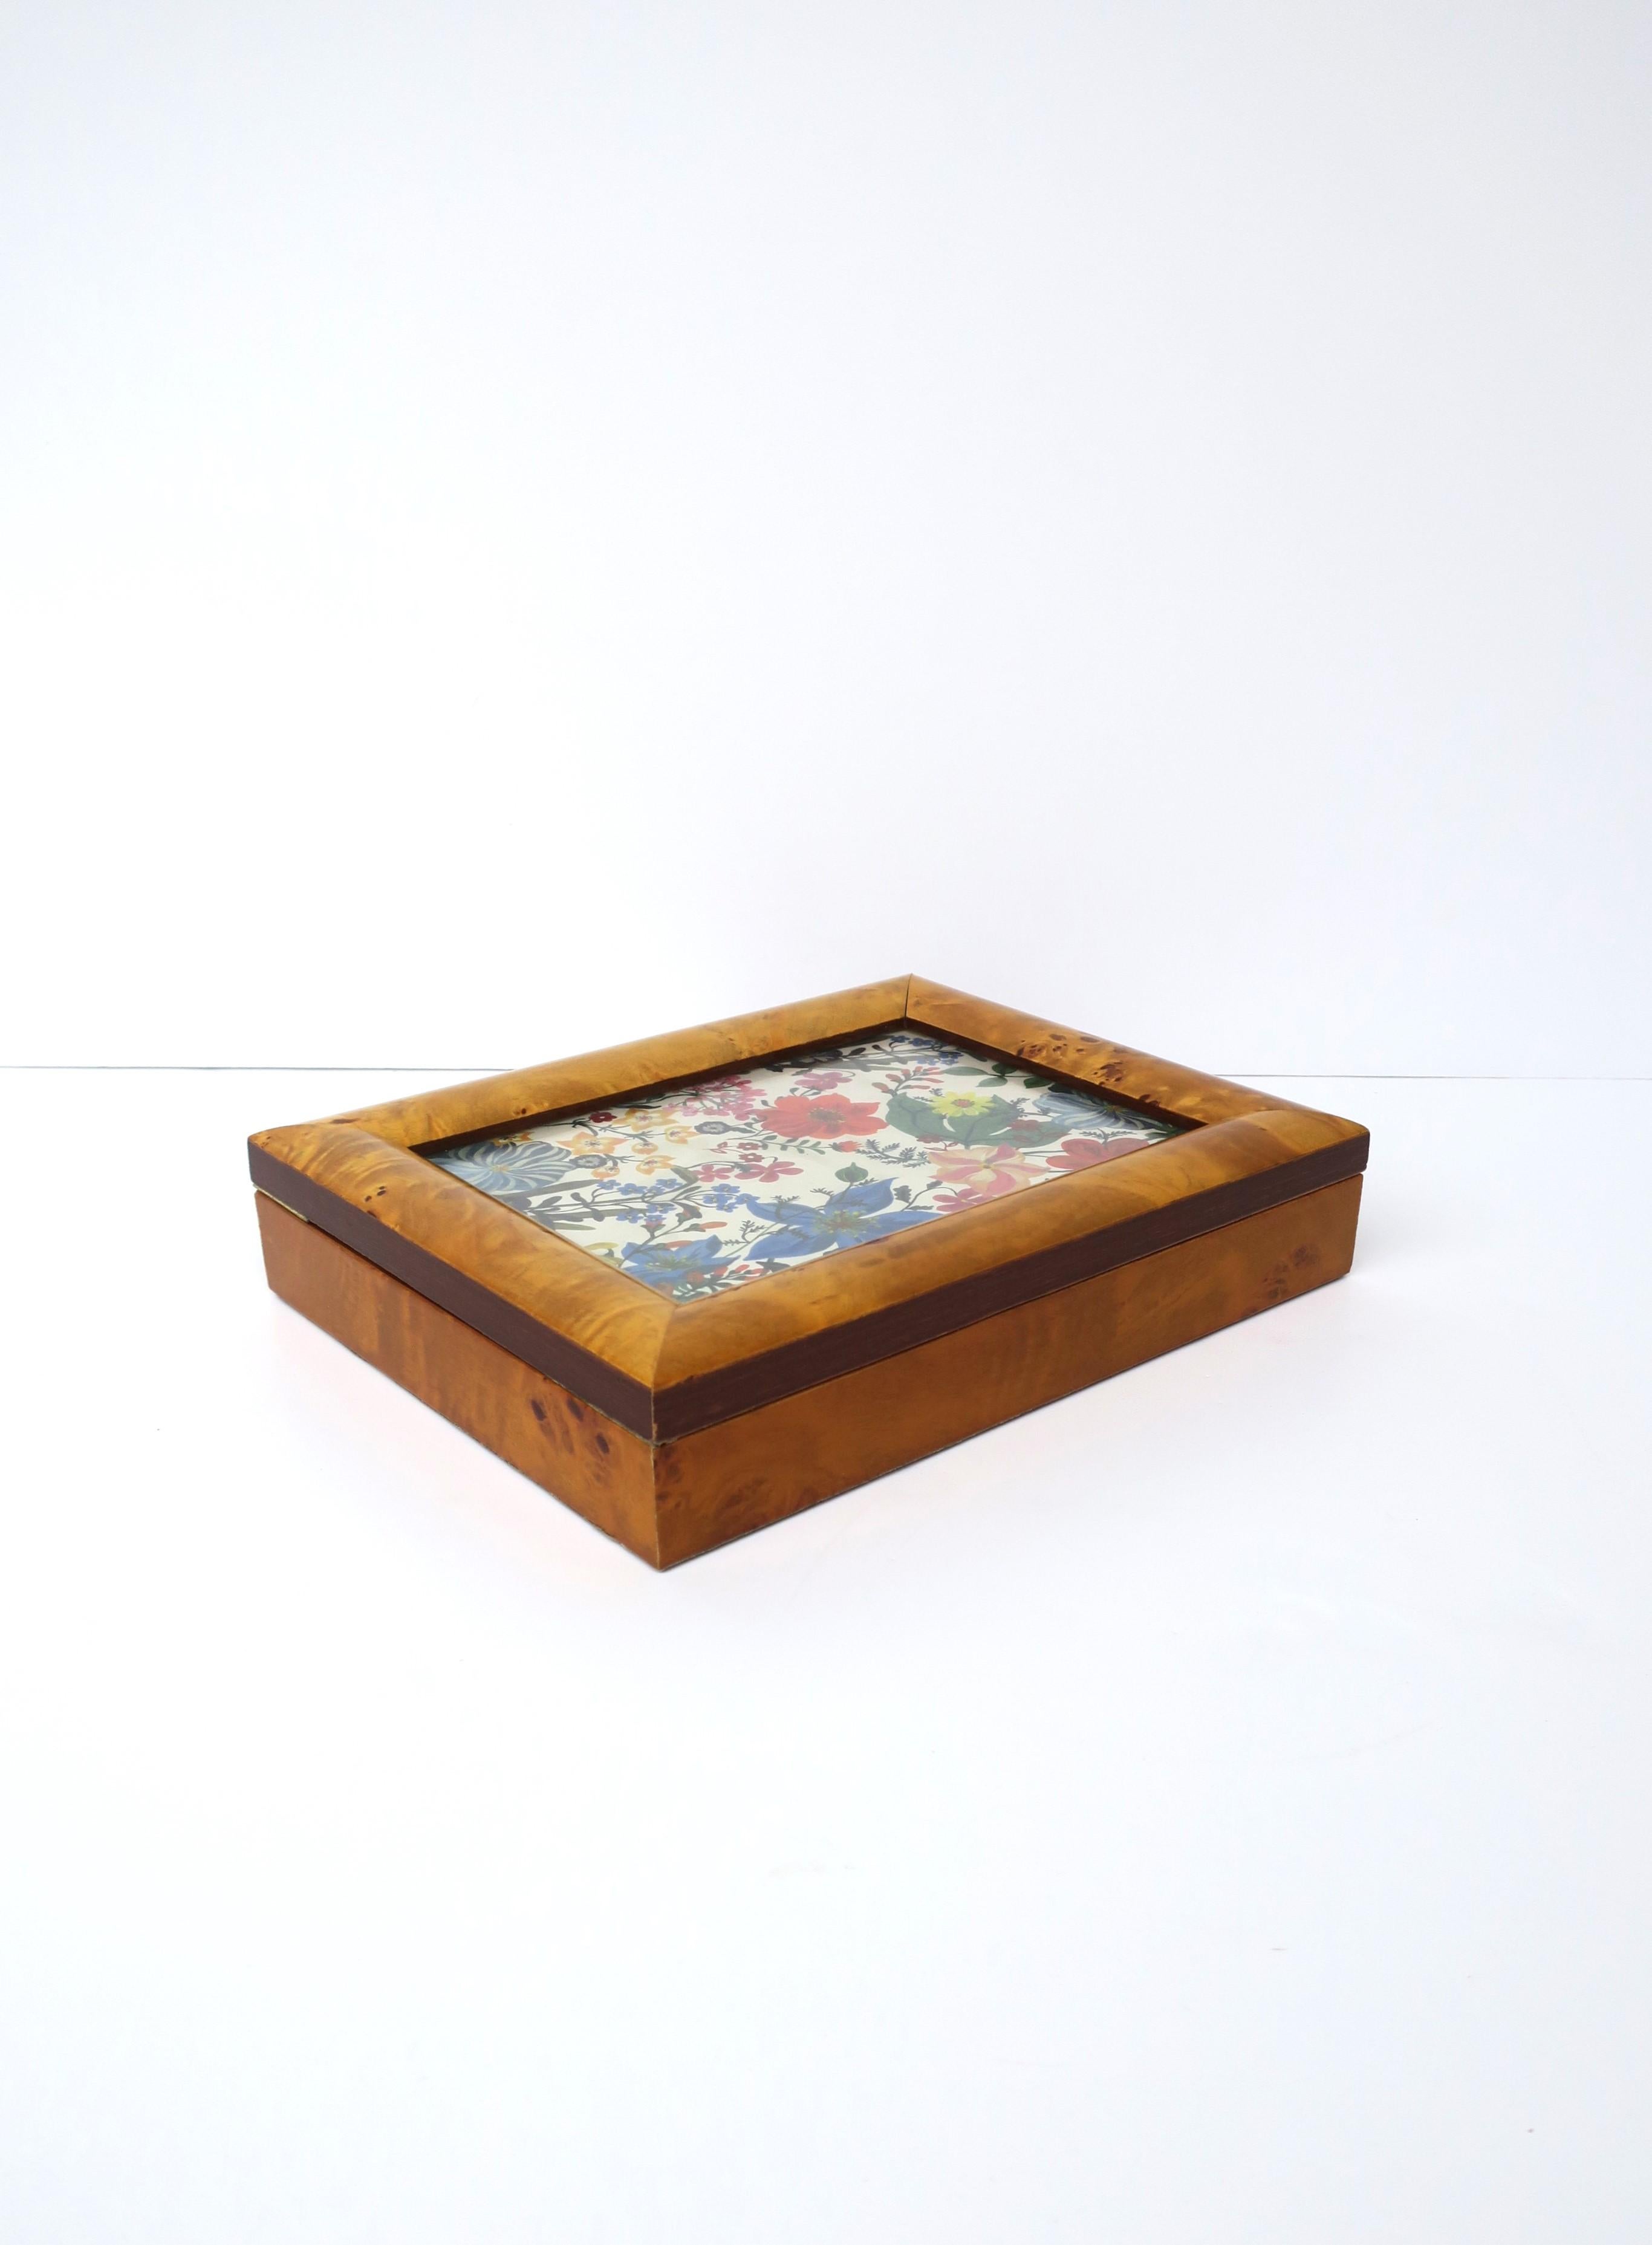 Veneer Burl Wood Jewelry Box and Picture Frame For Sale